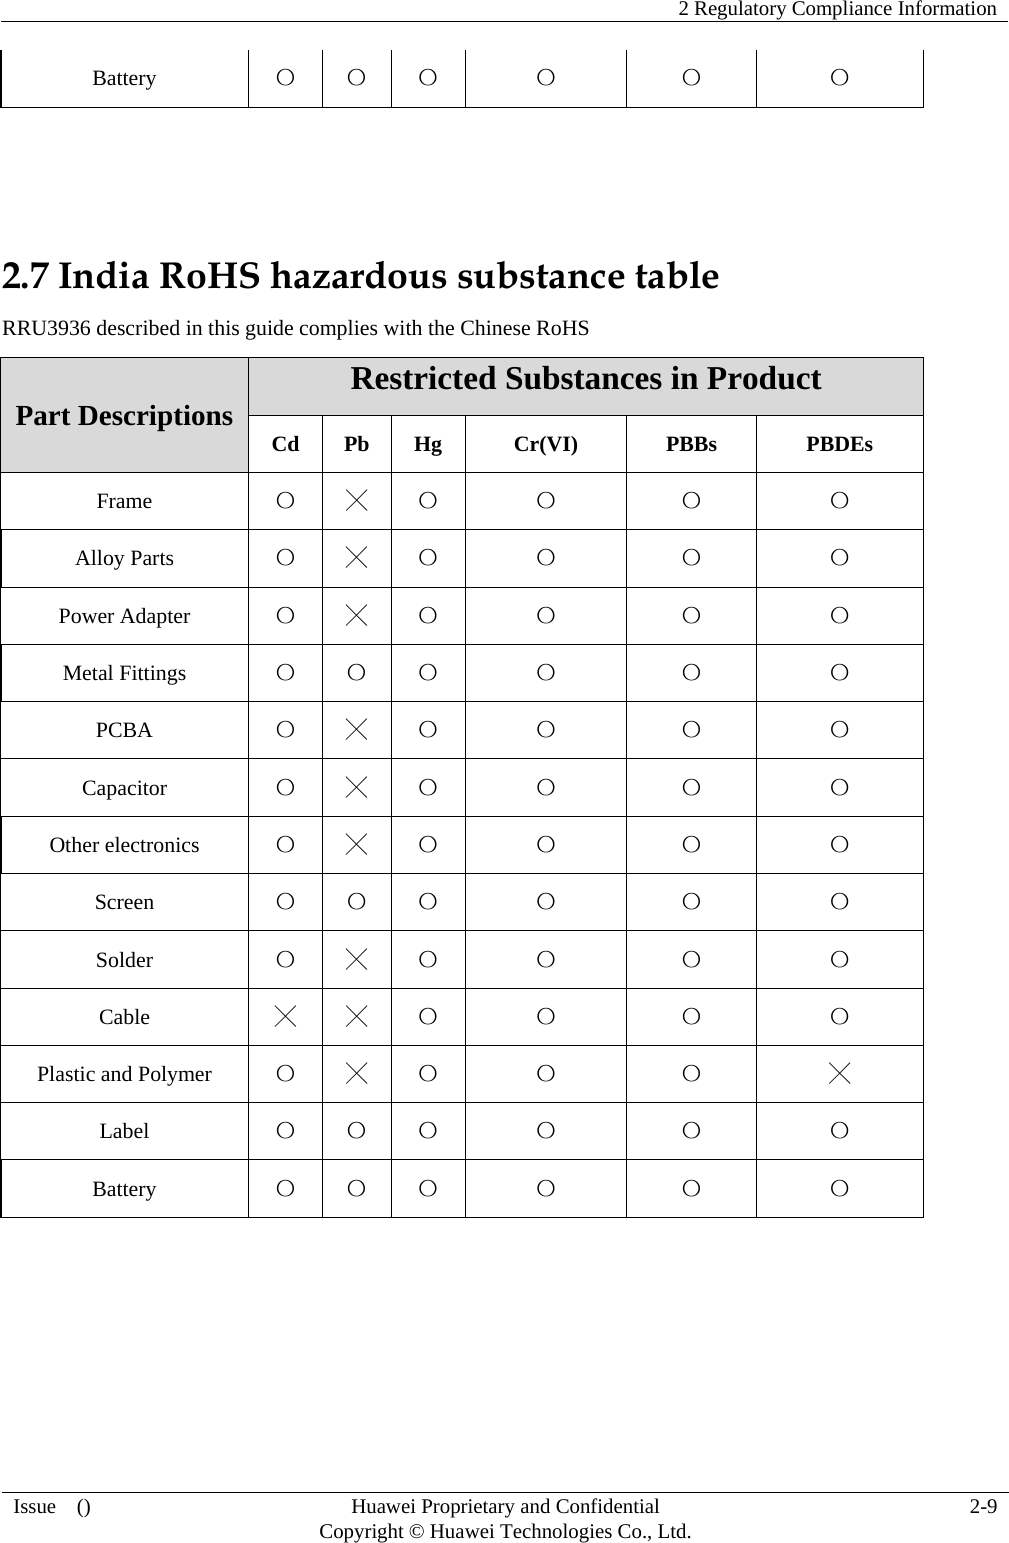    2 Regulatory Compliance Information   Issue  ()  Huawei Proprietary and Confidential     Copyright © Huawei Technologies Co., Ltd.  2-9  Battery  〇 〇 〇 〇 〇 〇   2.7 India RoHS hazardous substance table RRU3936 described in this guide complies with the Chinese RoHS Part Descriptions  Restricted Substances in Product Cd Pb Hg  Cr(VI)  PBBs  PBDEs Frame  〇 ╳ 〇 〇 〇 〇 Alloy Parts  〇 ╳ 〇 〇 〇 〇 Power Adapter  〇 ╳ 〇 〇 〇 〇 Metal Fittings  〇 〇 〇 〇 〇 〇 PCBA  〇 ╳ 〇 〇 〇 〇 Capacitor  〇 ╳ 〇 〇 〇 〇 Other electronics  〇 ╳ 〇 〇 〇 〇 Screen  〇 〇 〇 〇 〇 〇 Solder  〇 ╳ 〇 〇 〇 〇 Cable  ╳ ╳ 〇 〇 〇 〇 Plastic and Polymer  〇 ╳ 〇 〇 〇 ╳ Label  〇 〇 〇 〇 〇 〇 Battery  〇 〇 〇 〇 〇 〇   